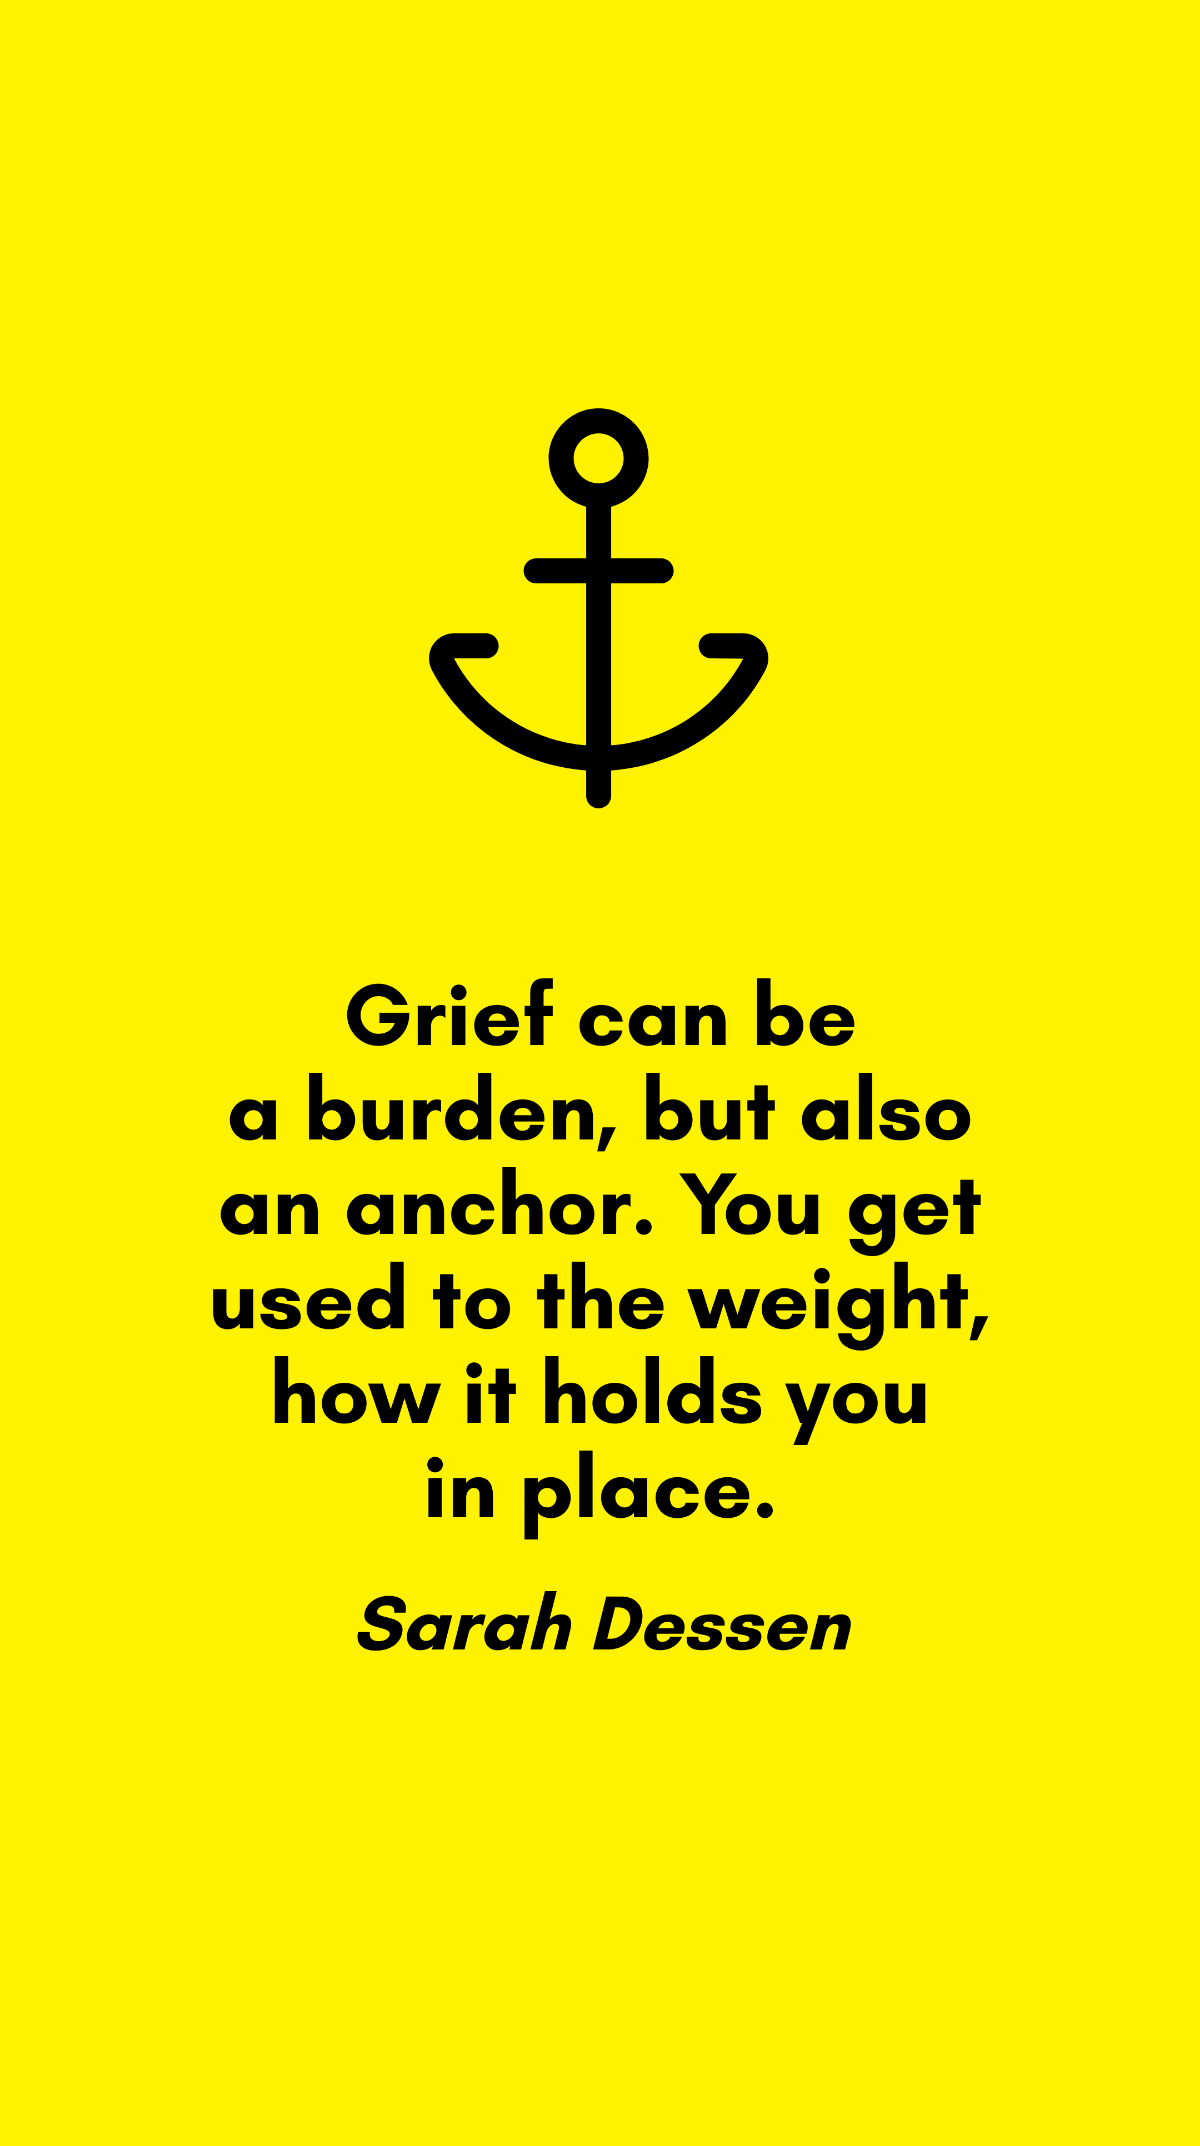 Free Sarah Dessen - Grief can be a burden, but also an anchor. You get used to the weight, how it holds you in place. Template